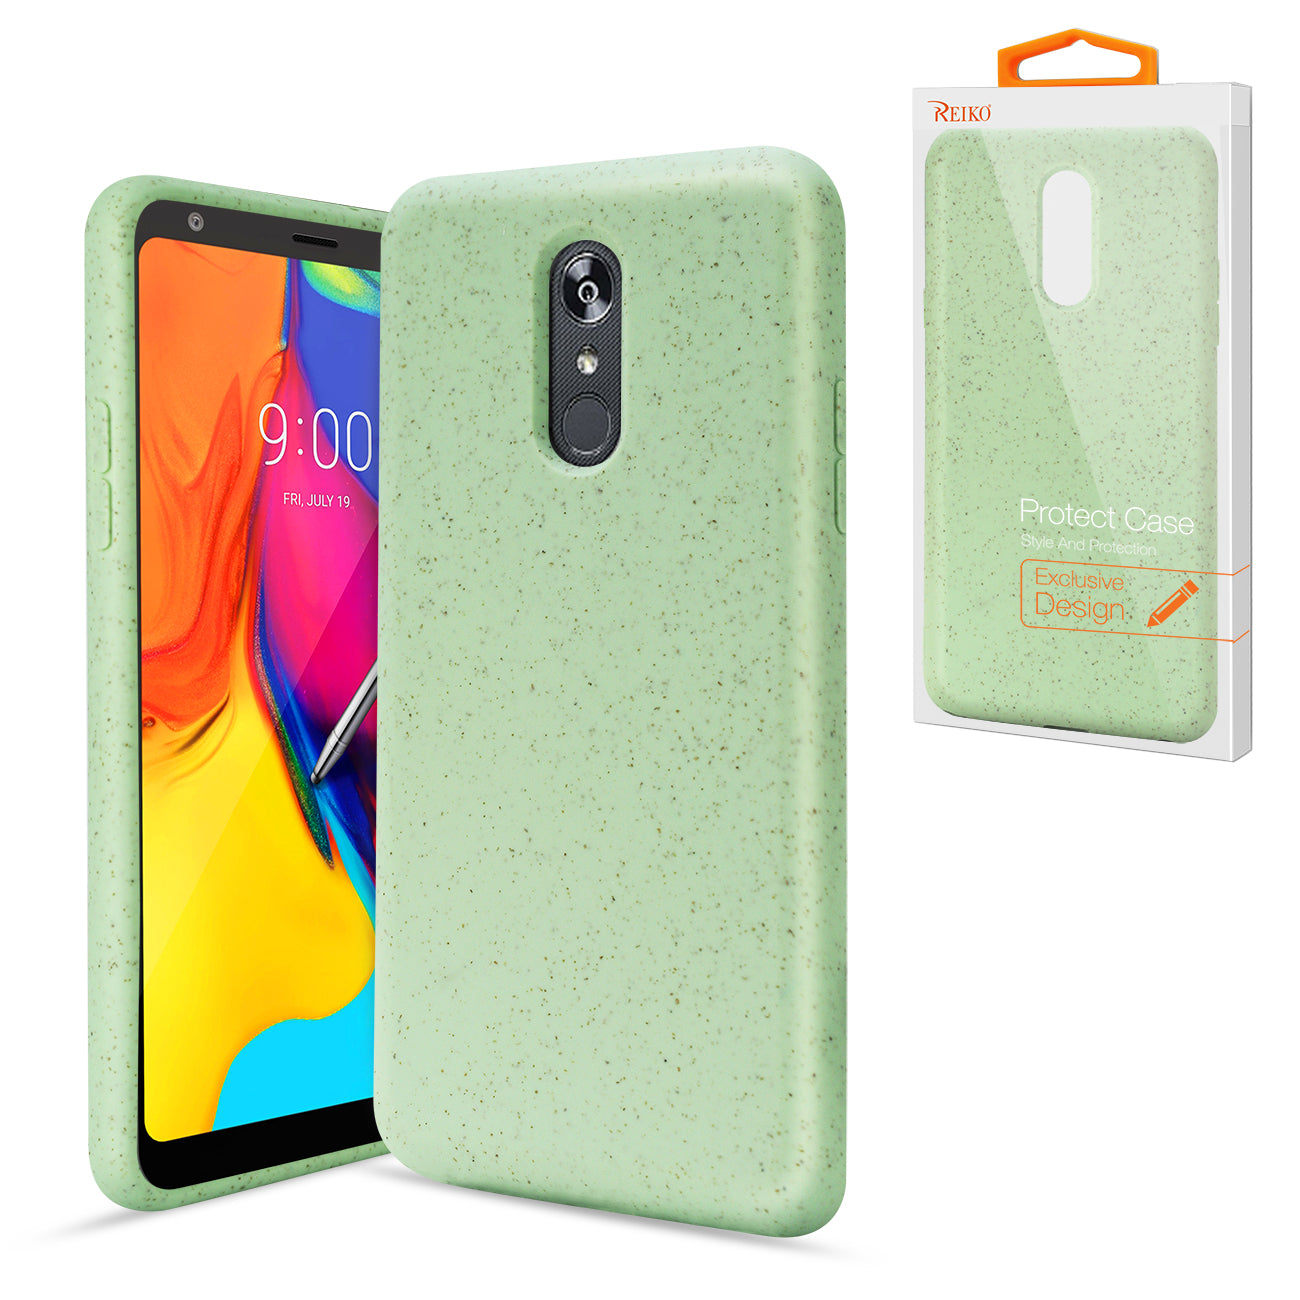 Phone Case Silicone Wheat Bran Material LG Stylo 5 Green Color